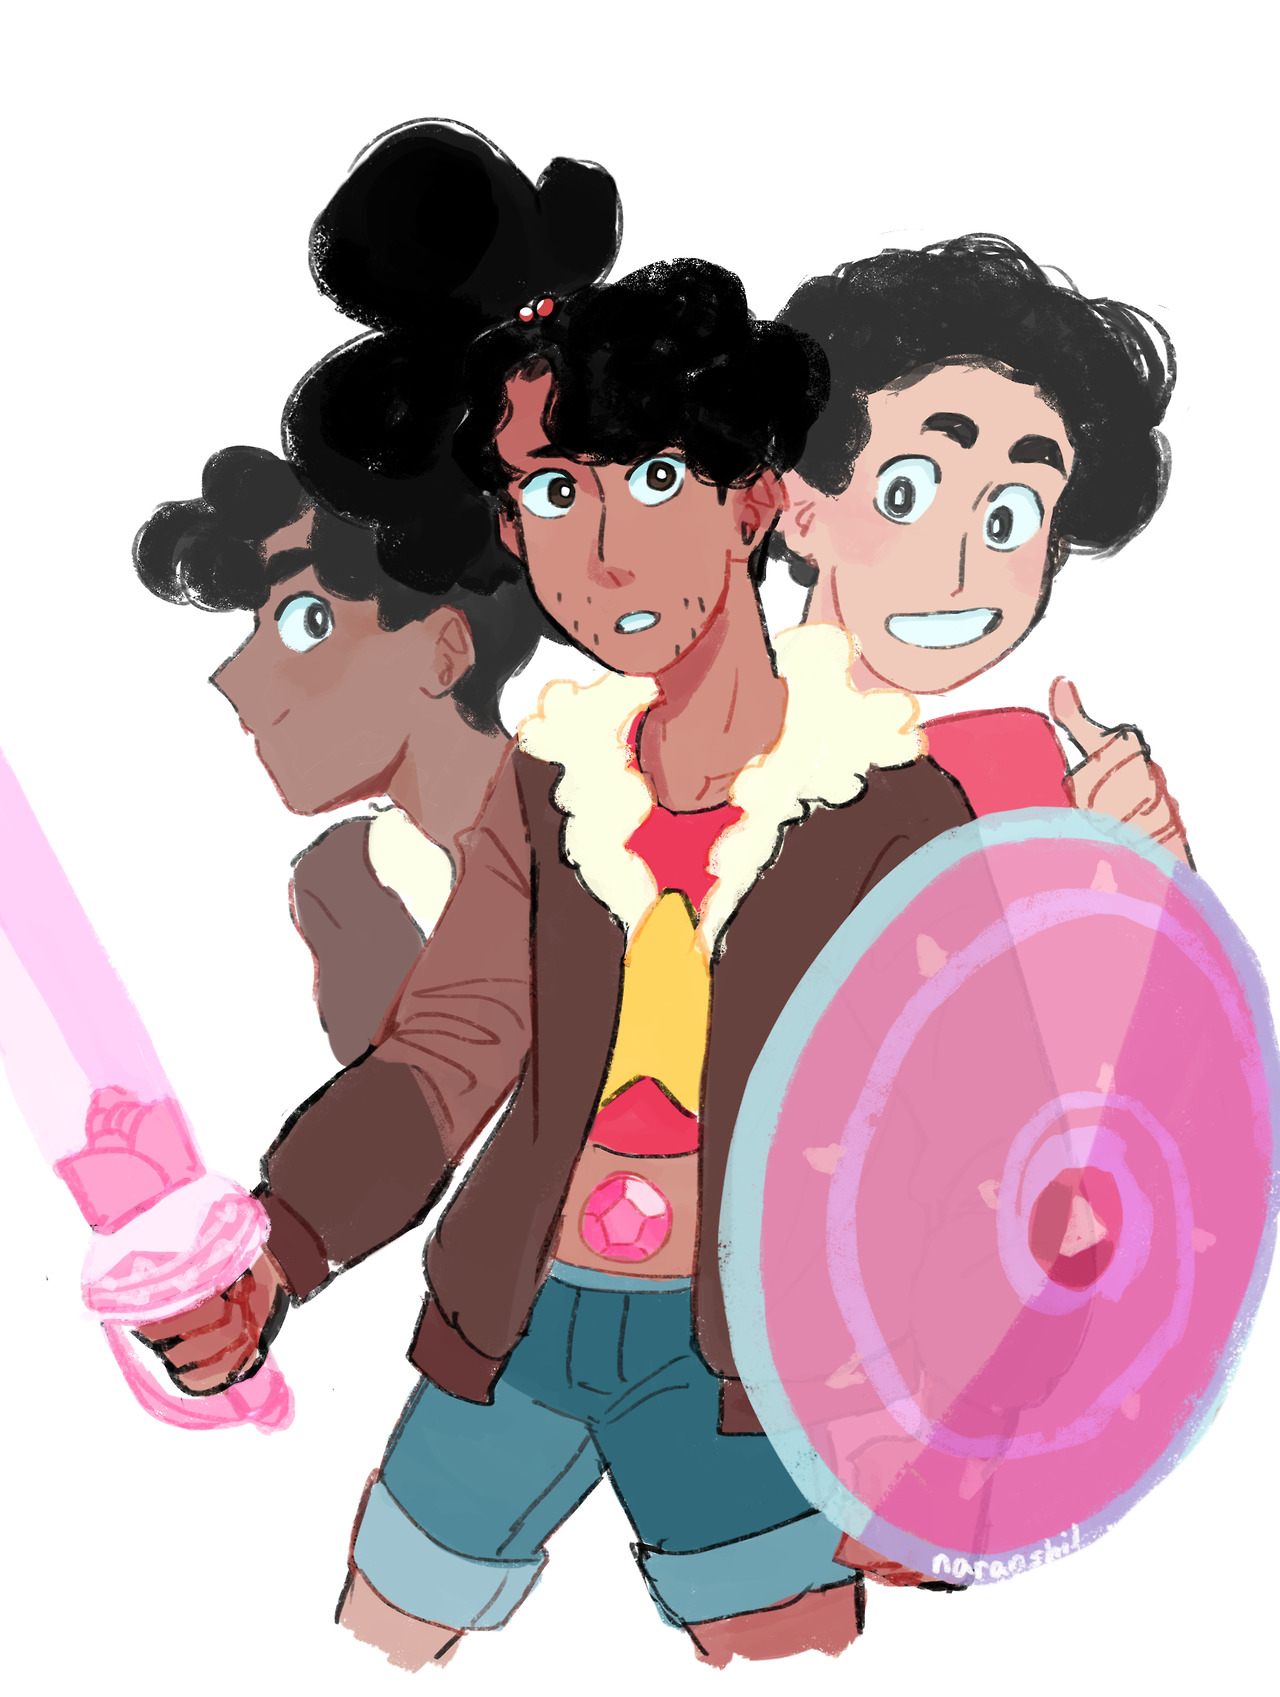 i loved stevonnie in the jungle moon ep!!!